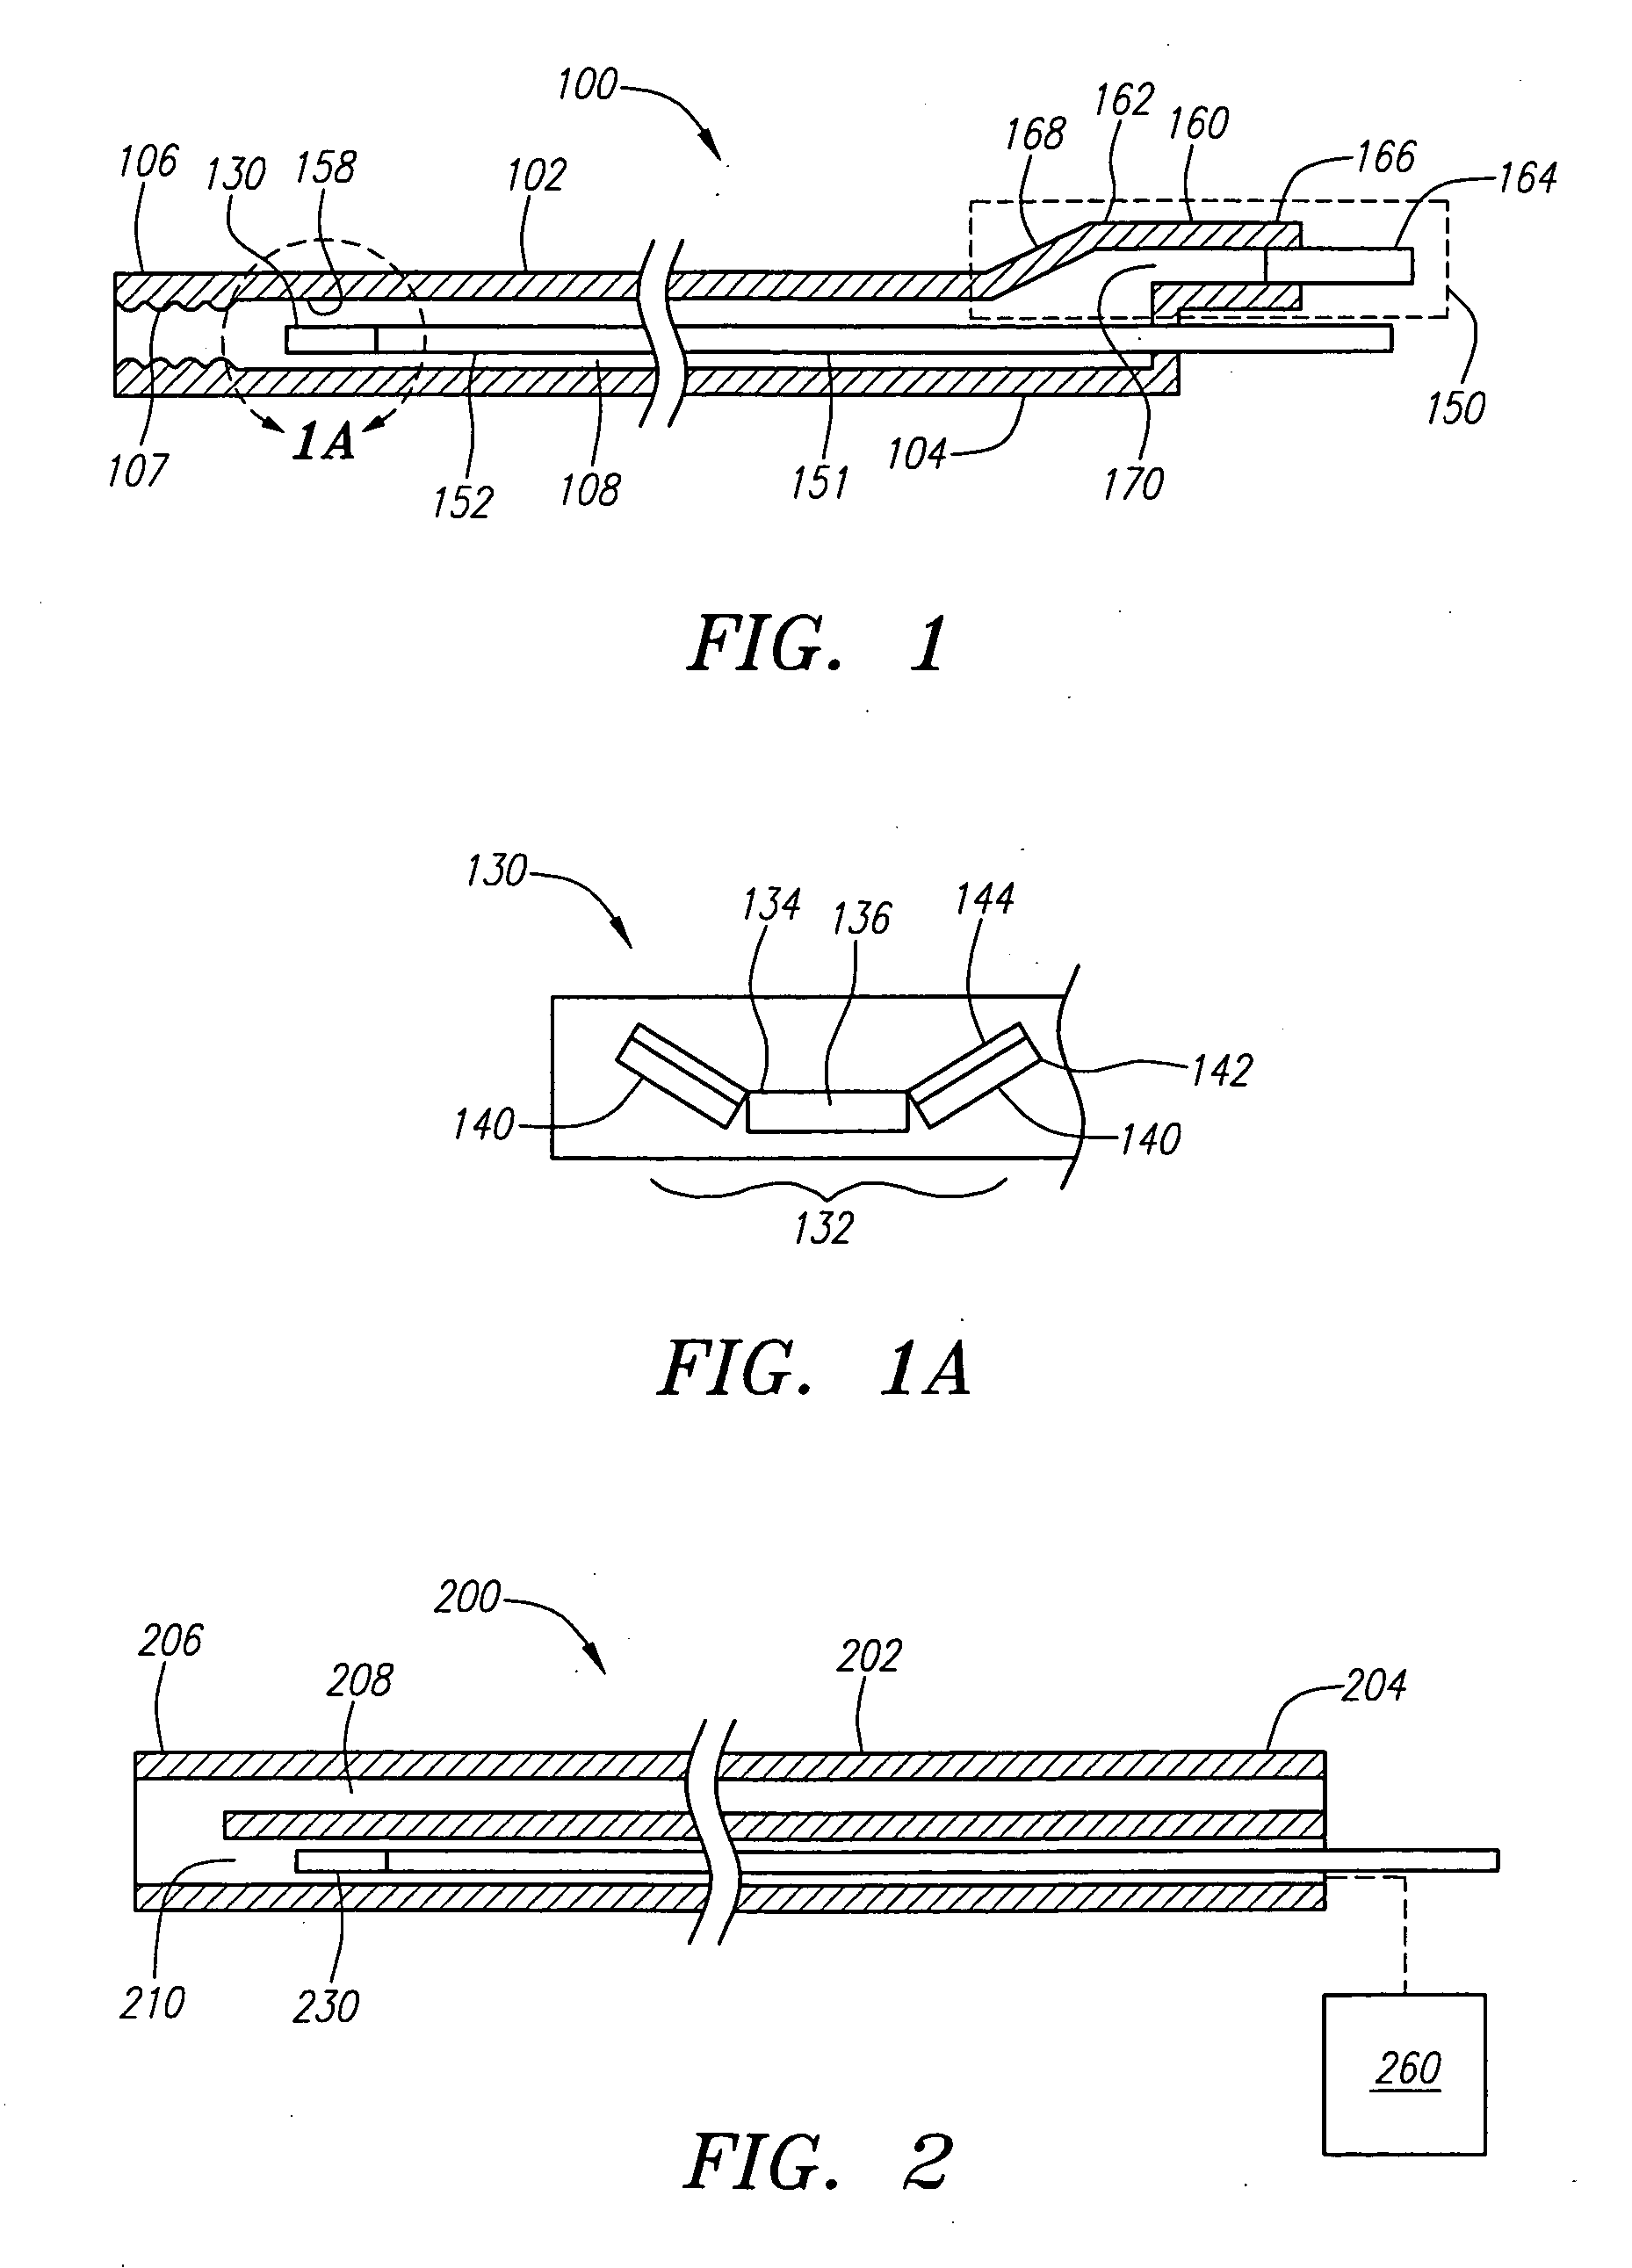 Systems and methods for treating breast tissue